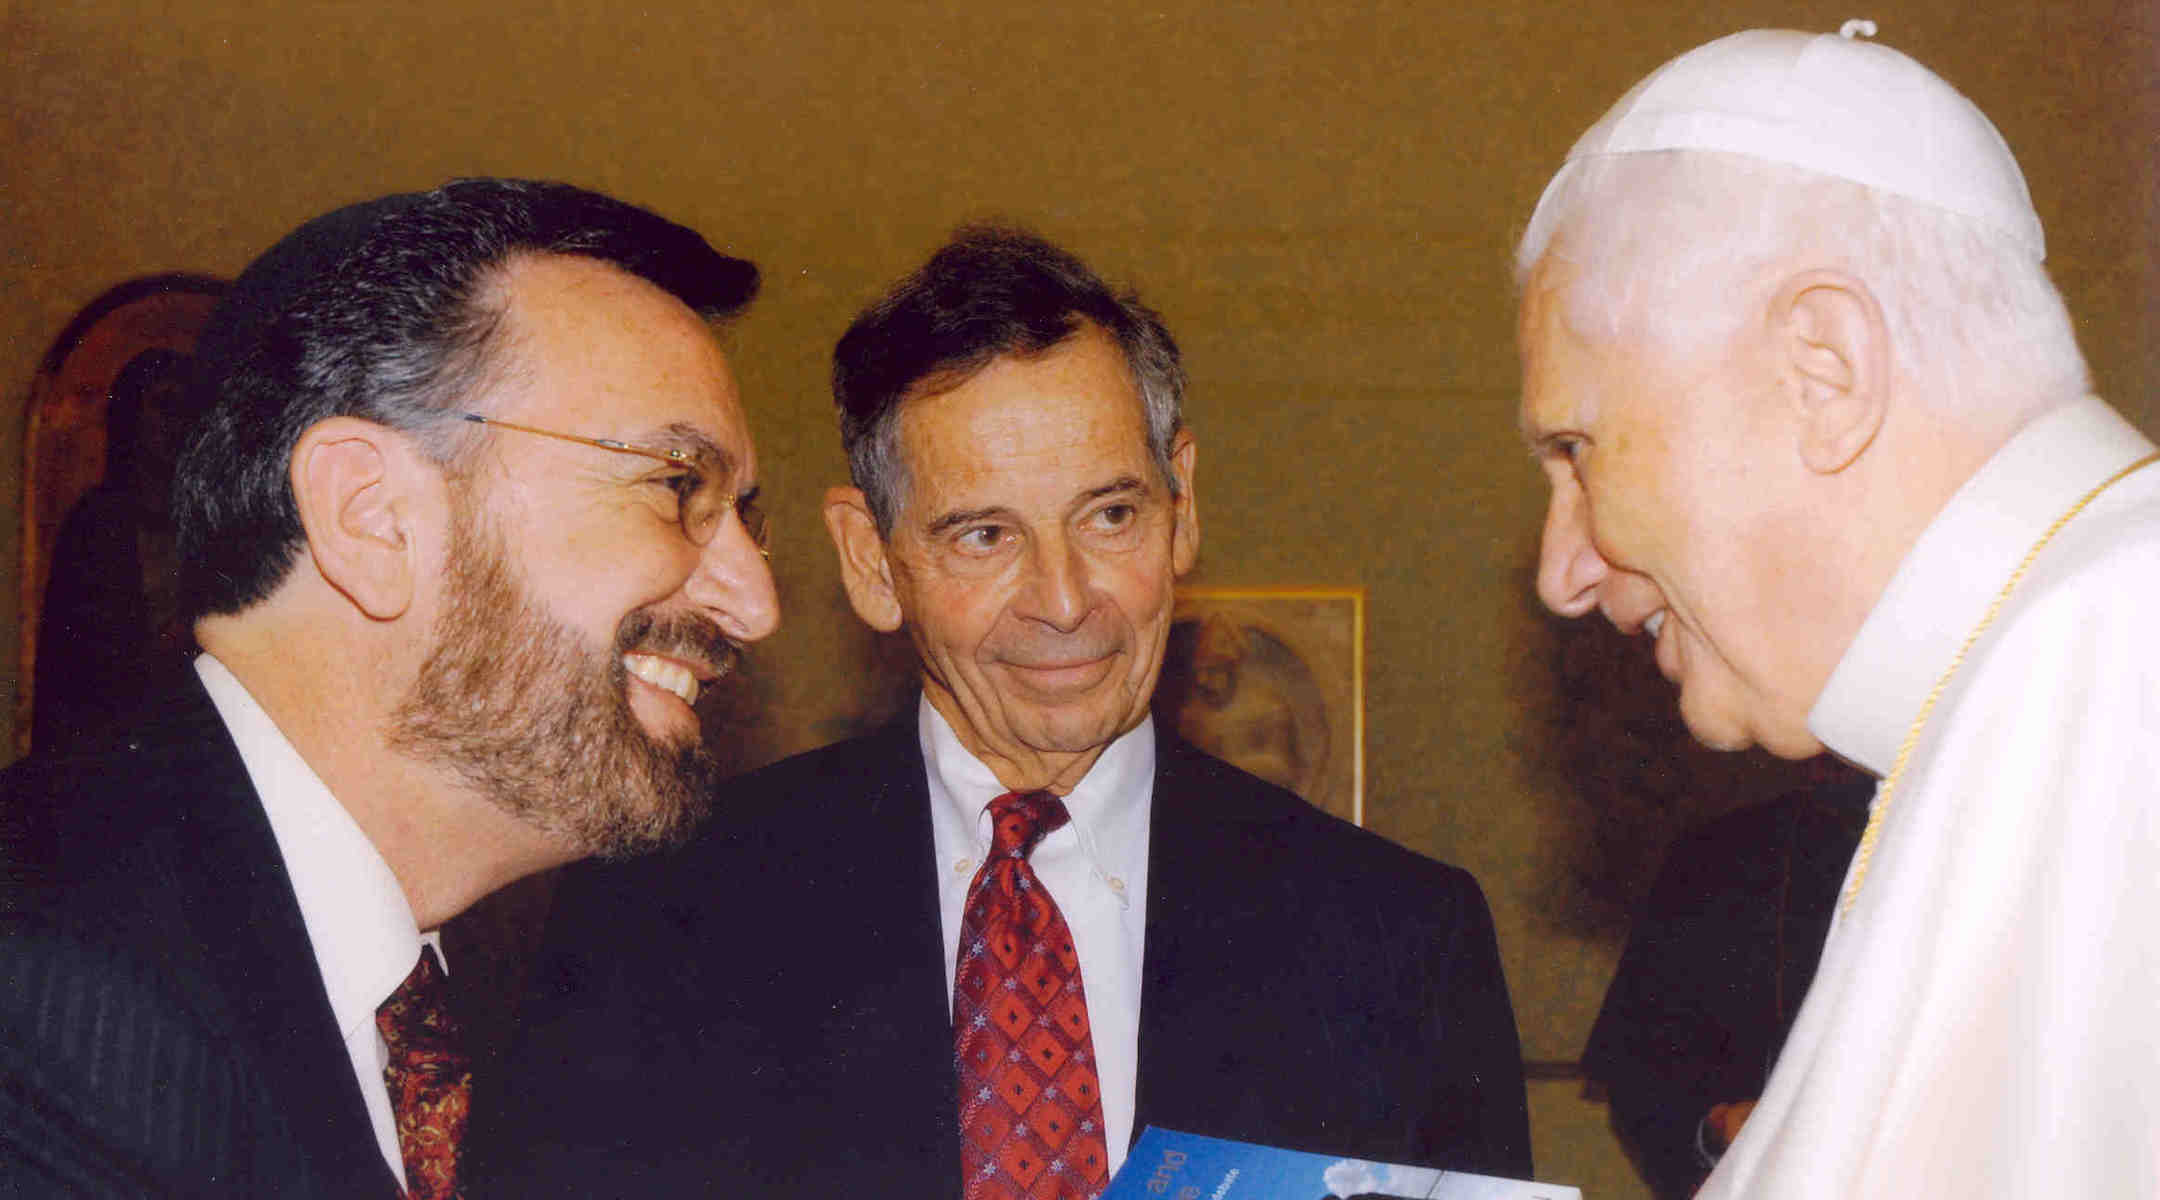 Rabbi David Rosen, left, meets with Pope Benedict XVI, right, during the American Jewish Committee’s leadership audience with the pope at the Vatican, March 2006. At center is E. Robert Goodkind, AJC president at the time. (American Jewish Committee)